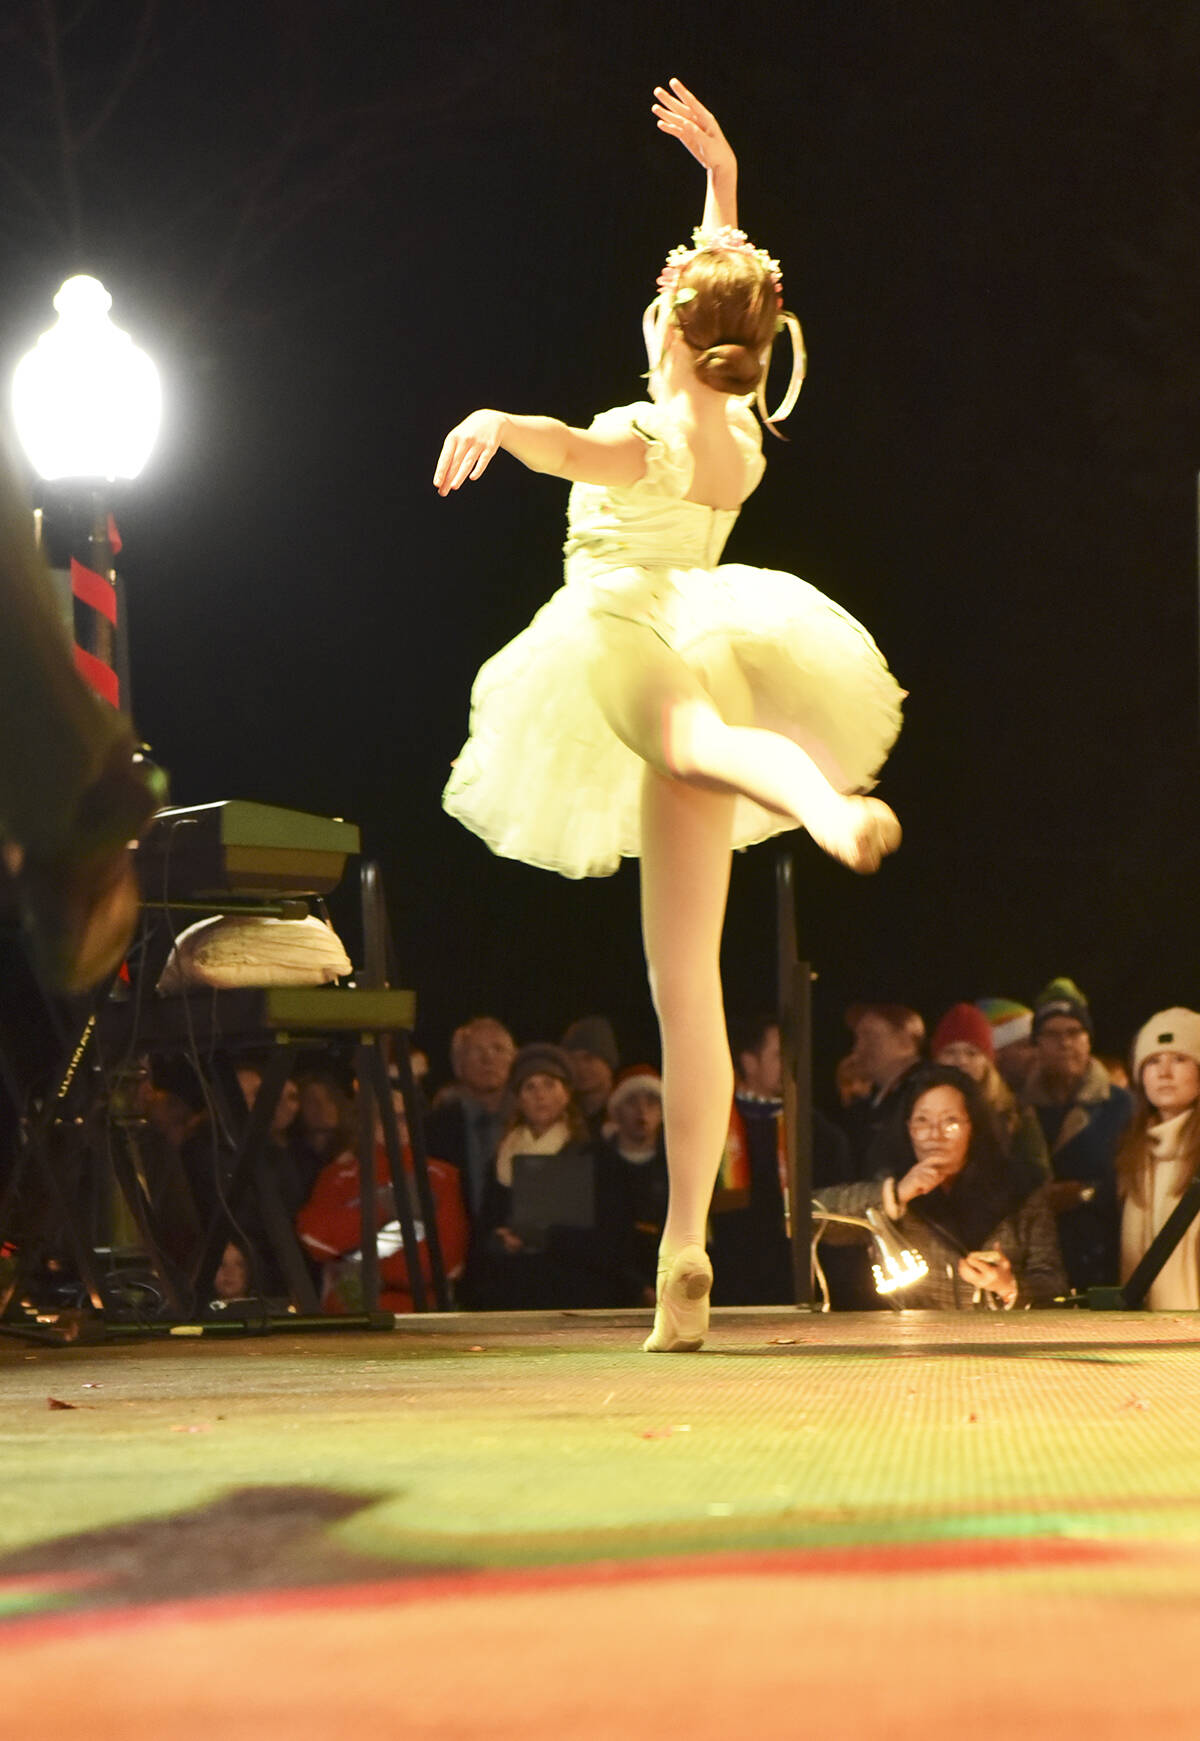 A ballerina delights the crowd with a classic and beautiful performance.